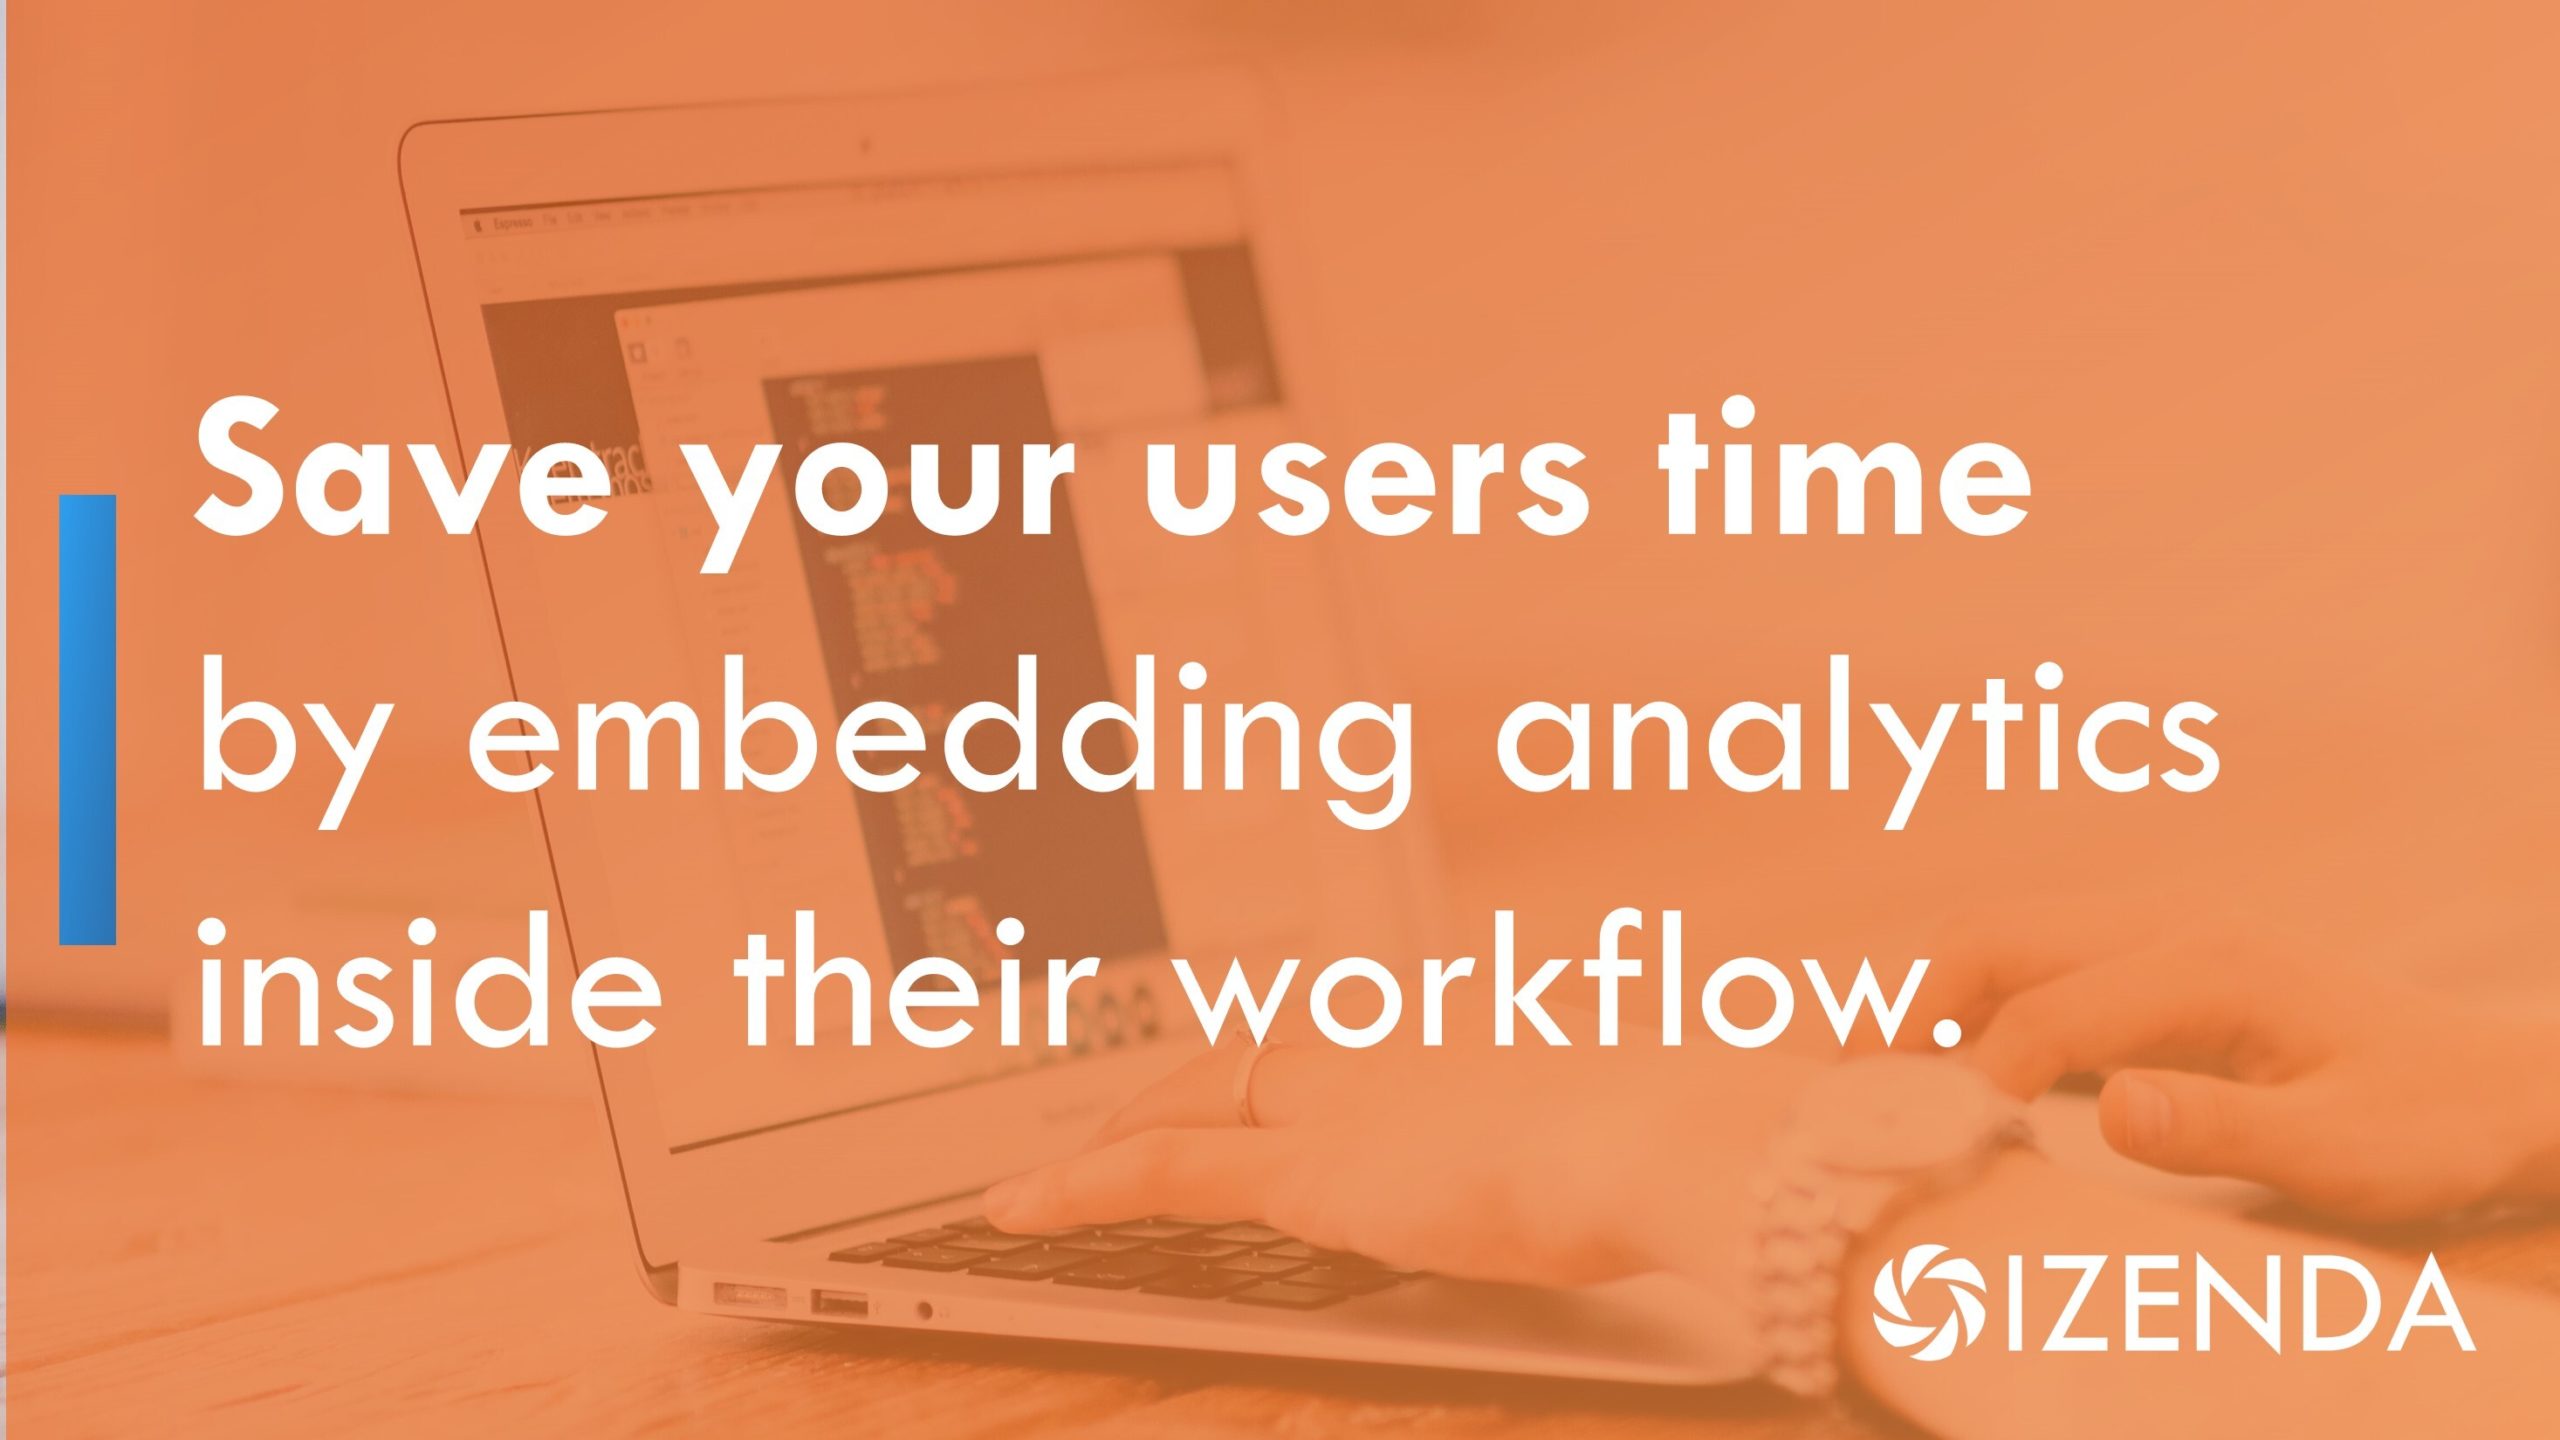 embedded analytics can save your end users one to two hours per week